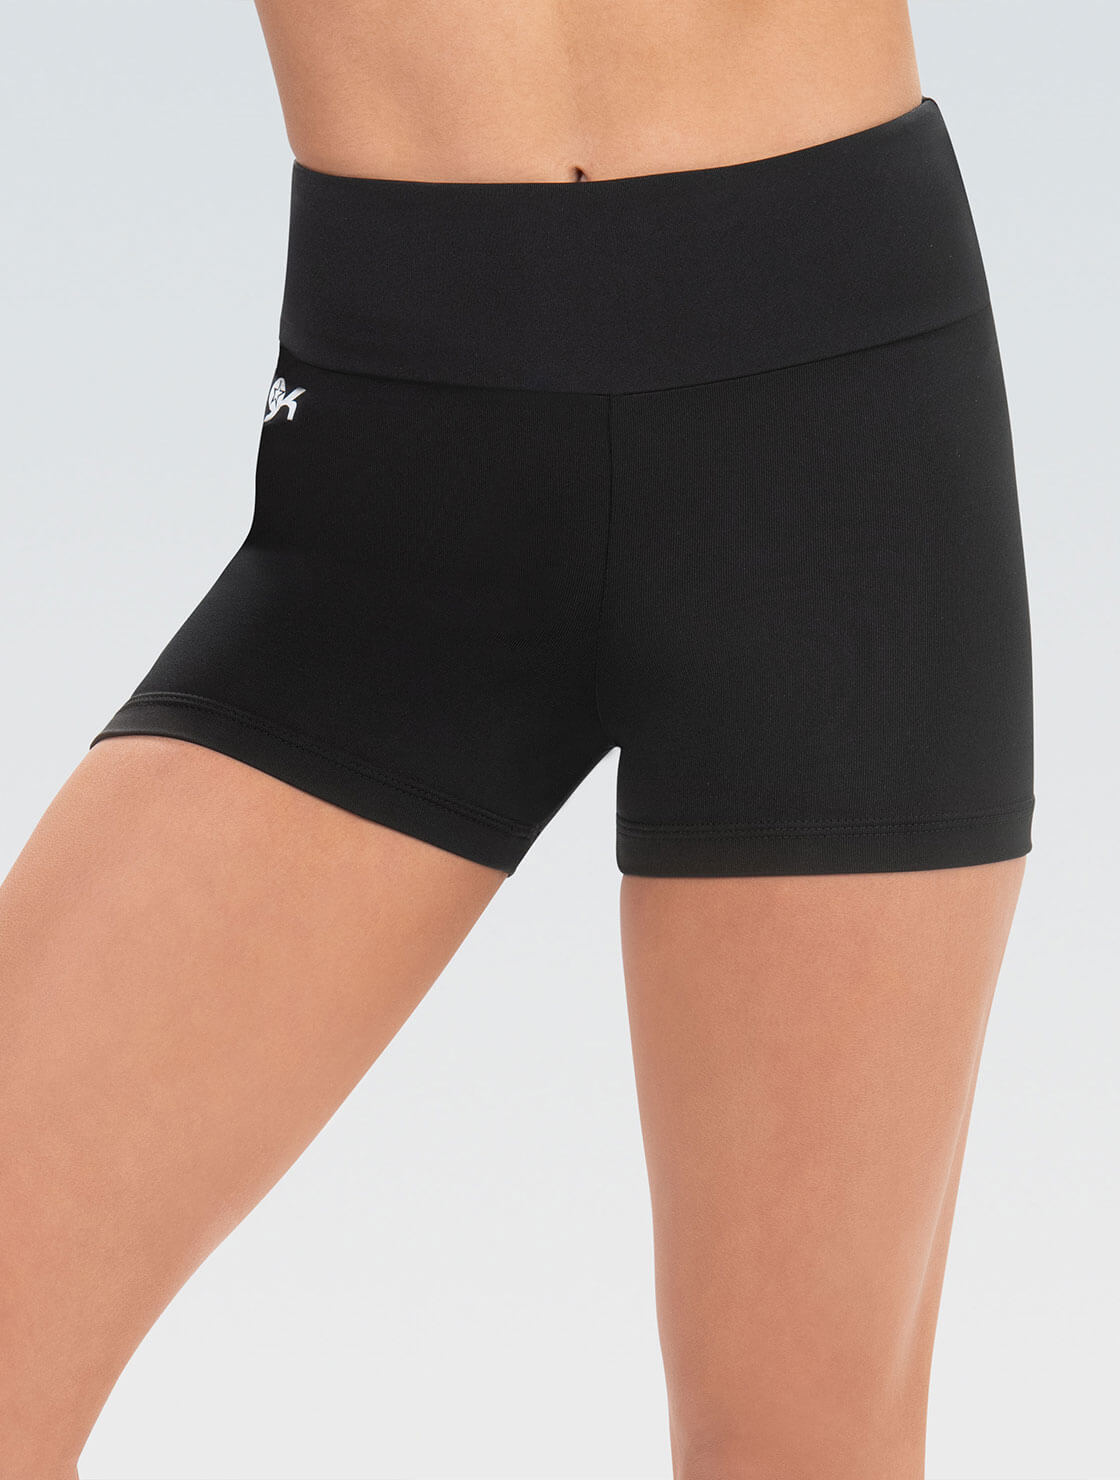 https://gkelite.blob.core.windows.net/images/product-images/cb598-gk-all-star-black-high-waisted-fitted-shorts-front.jpg